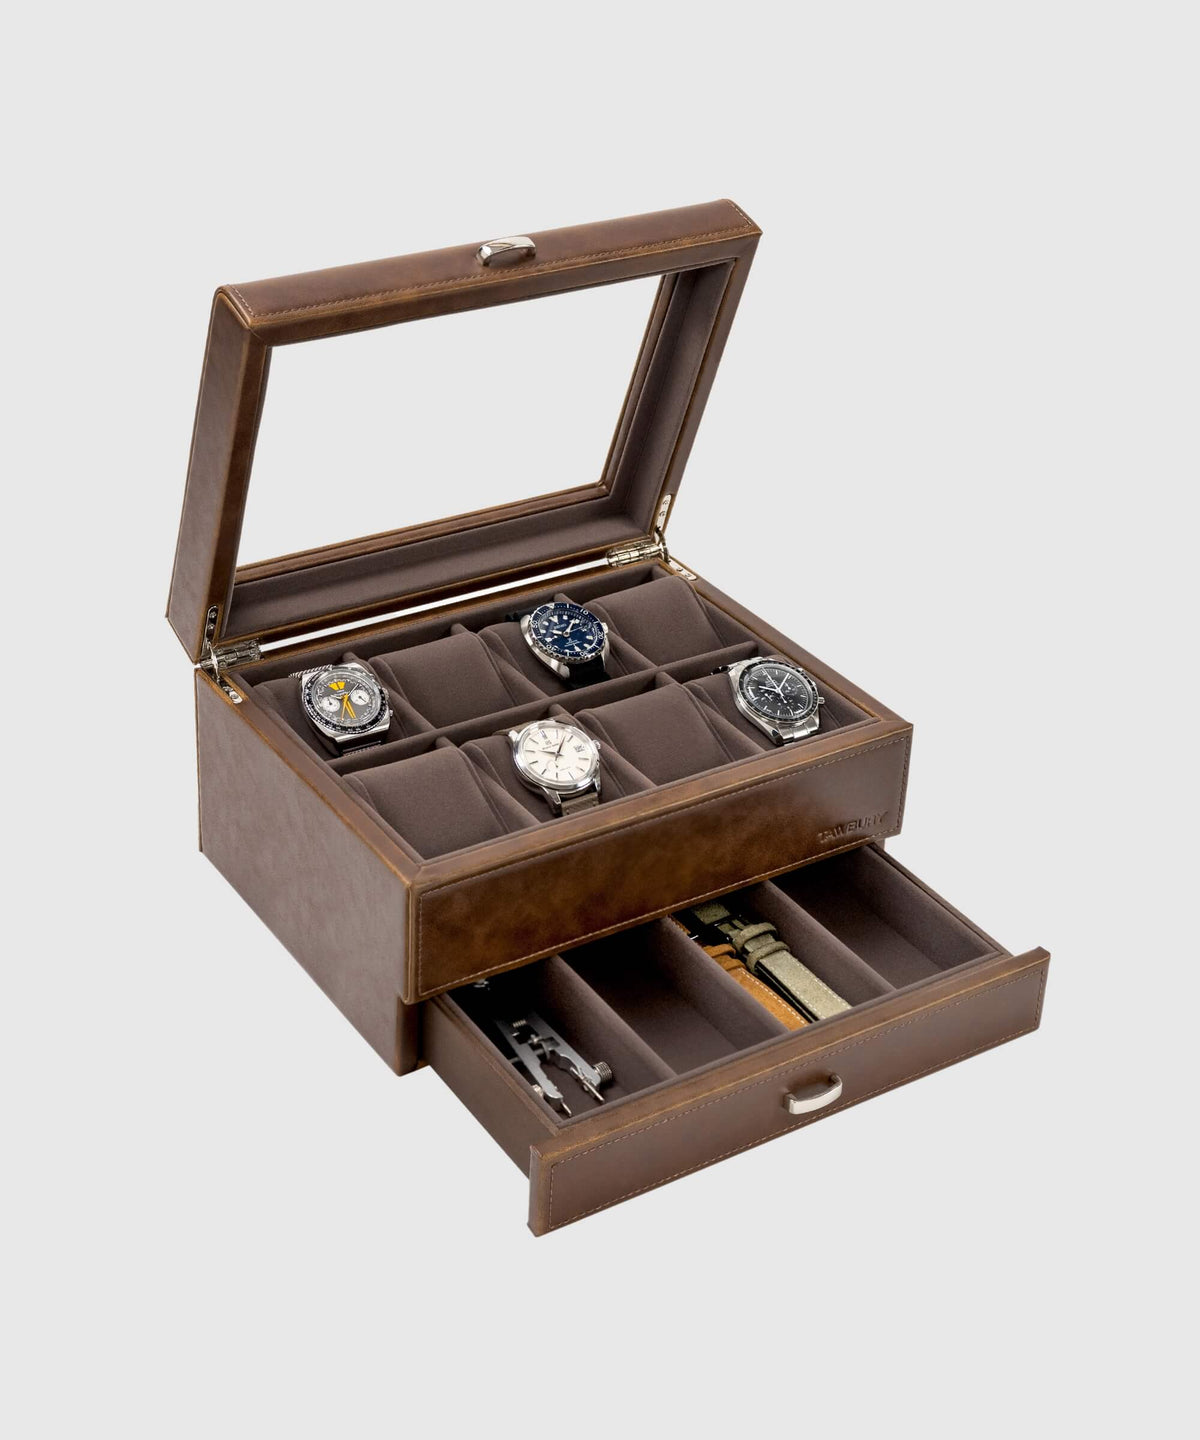 A TAWBURY Bayswater 8 Slot Watch Box with Drawer - Brown with a variety of wrist watches inside.